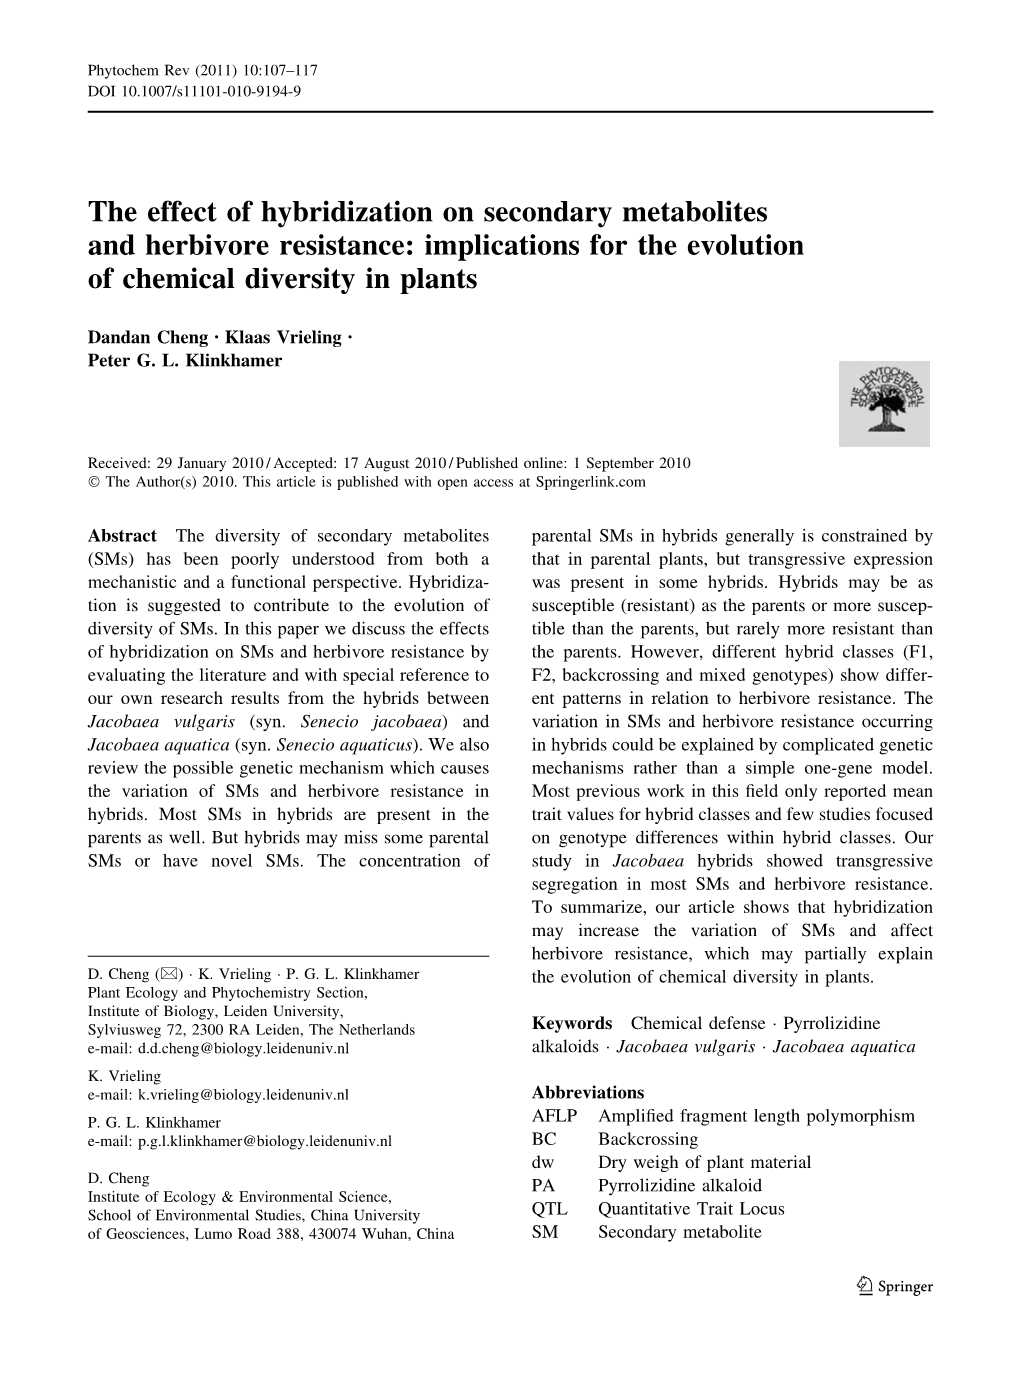 The Effect of Hybridization on Secondary Metabolites and Herbivore Resistance: Implications for the Evolution of Chemical Diversity in Plants